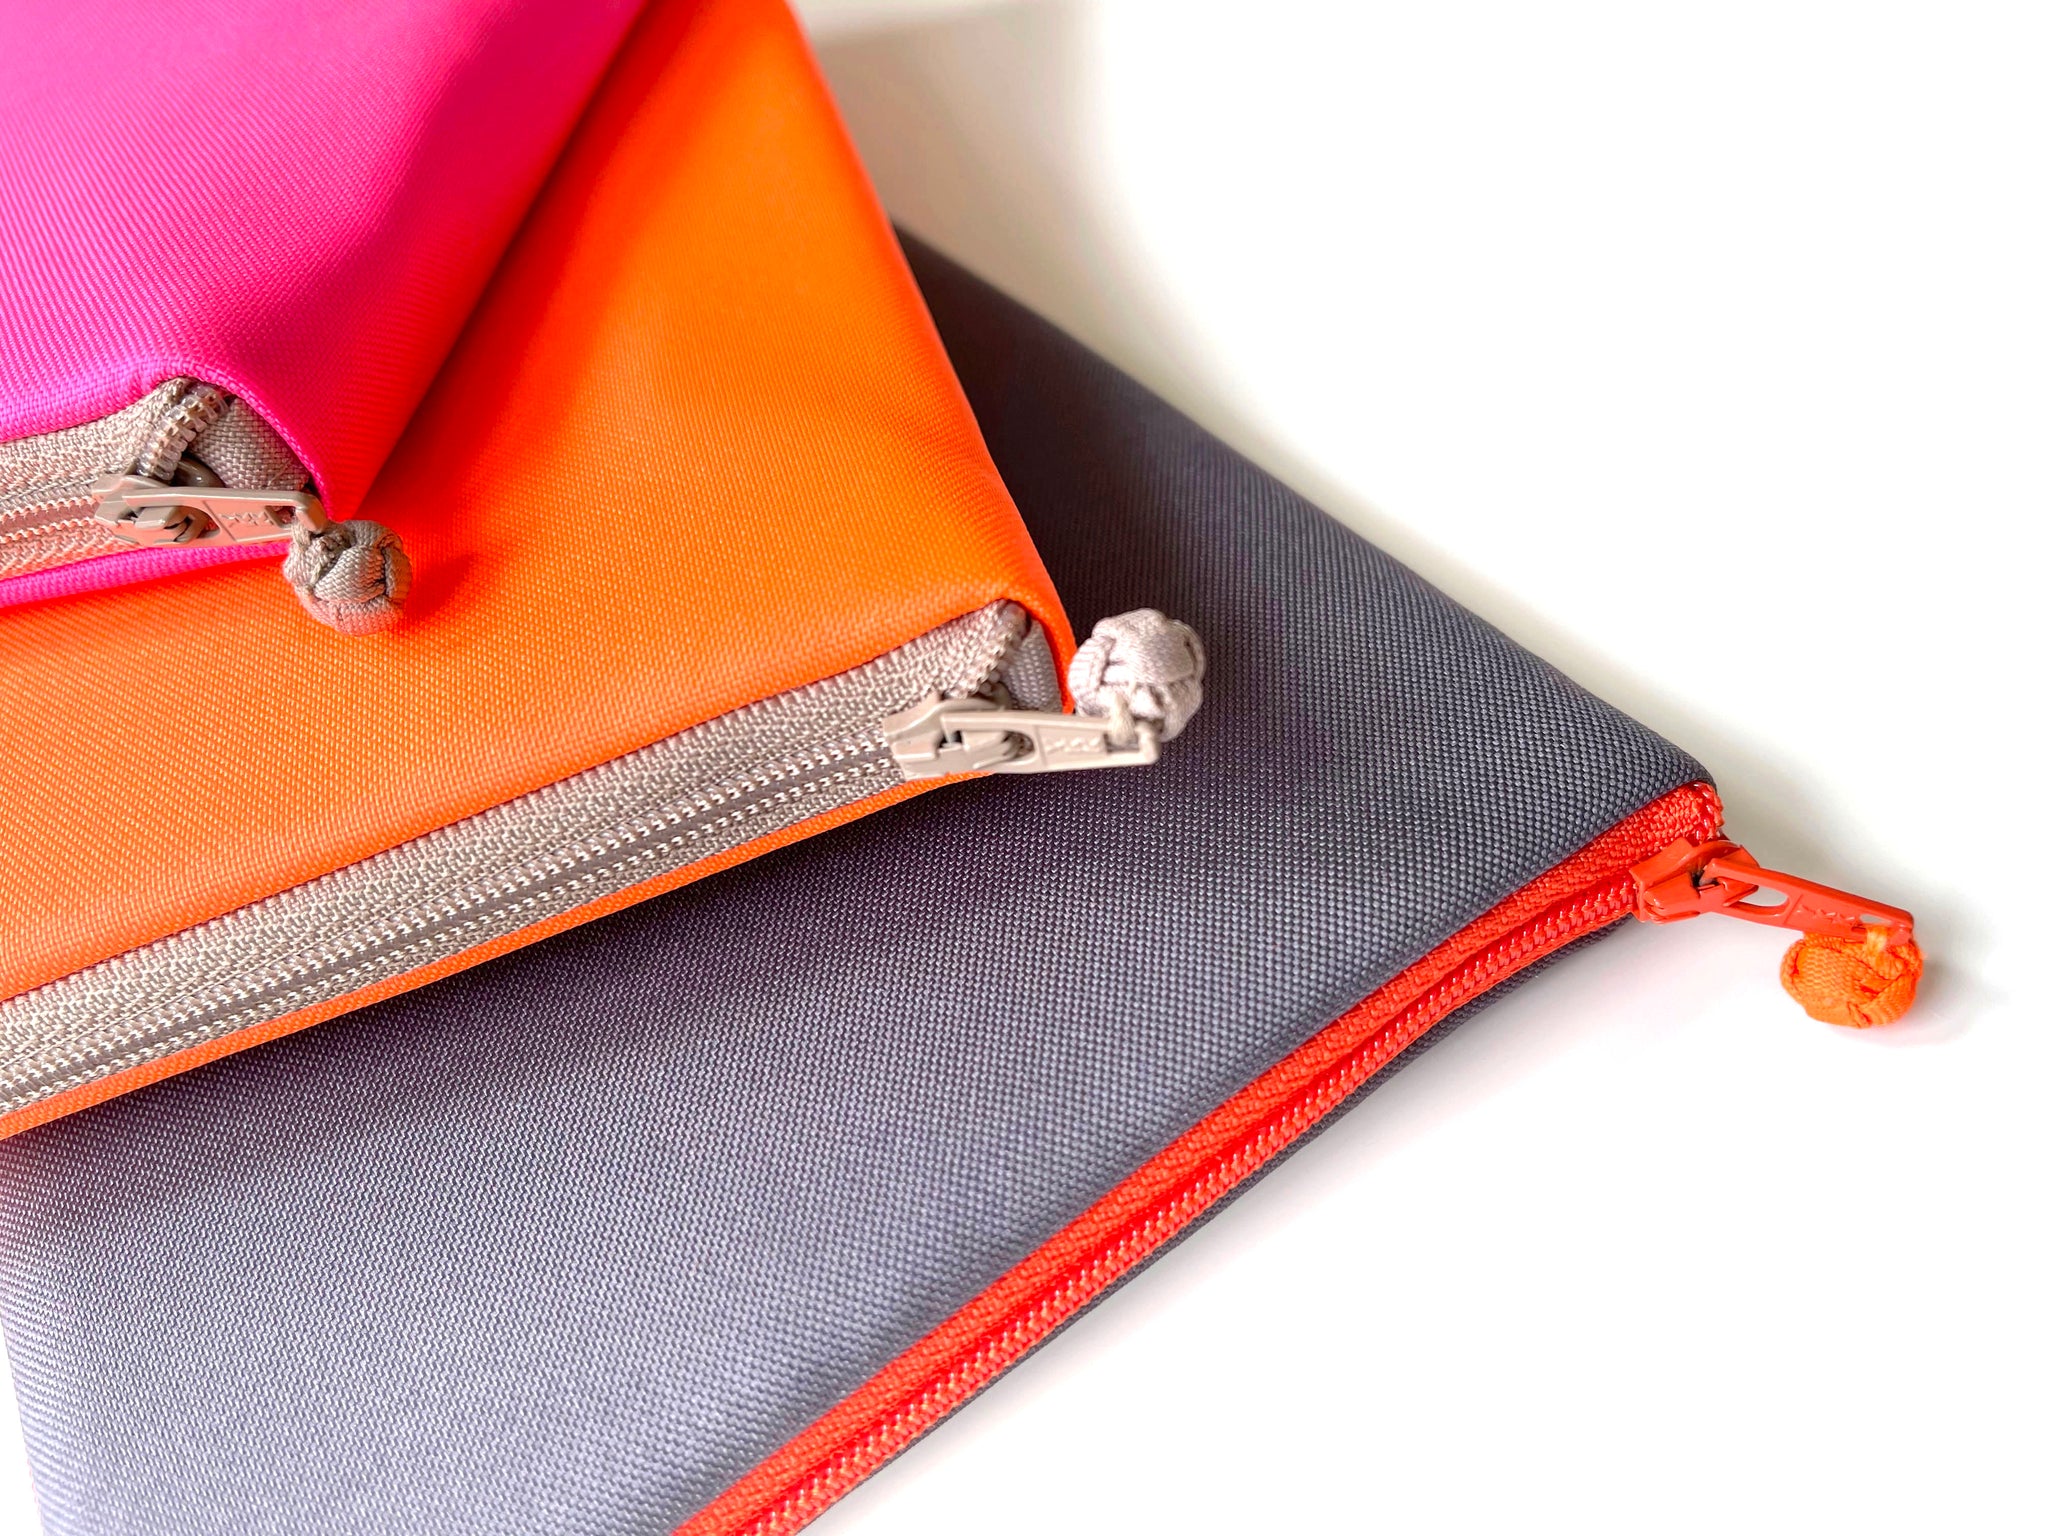 recycled kindle case in three different colors: neon orange, neon pink and dark grey